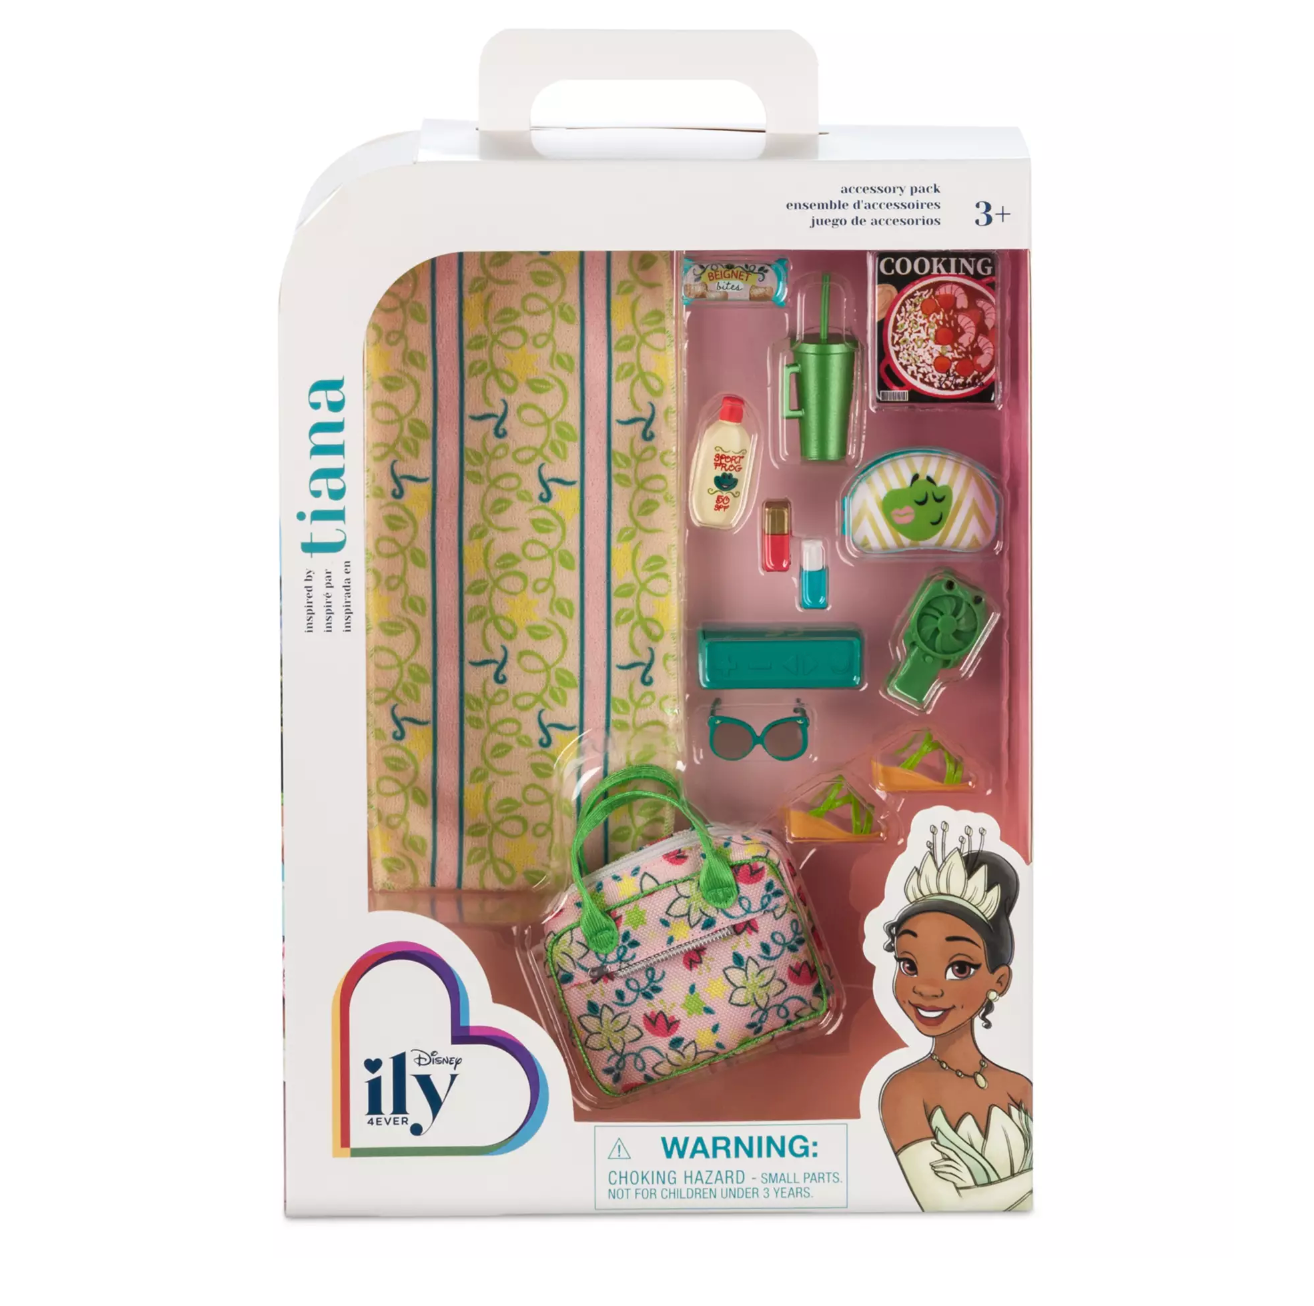 Disney ily 4EVER Accessory Pack Inspired by Tiana The Princess and the Frog New